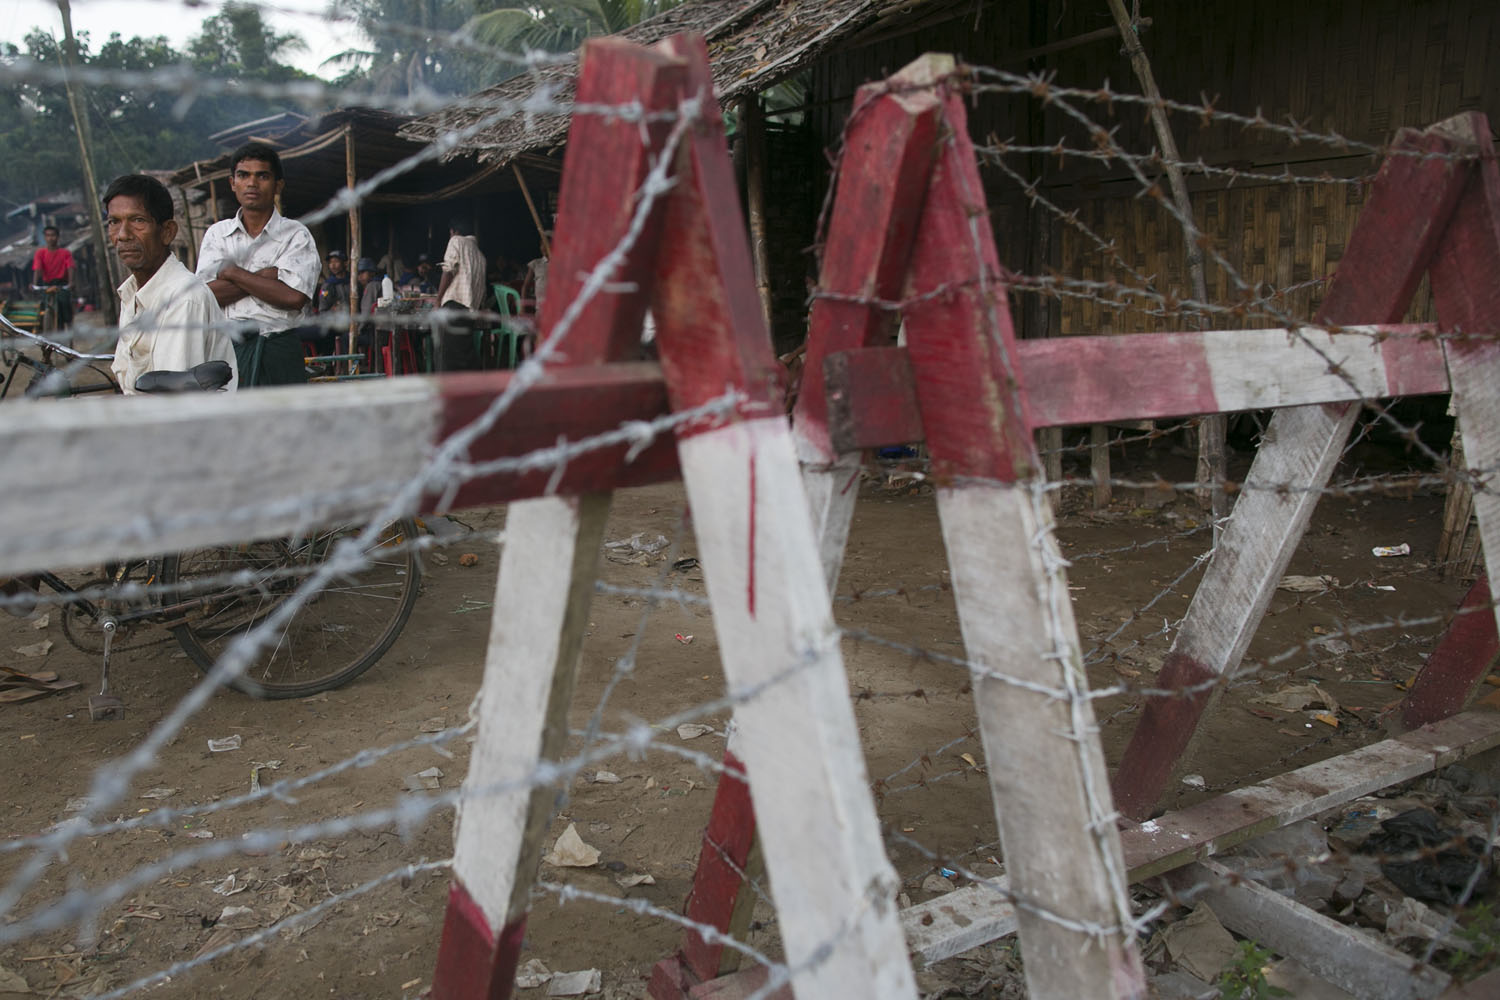 Rohingya men look out from behind a barbed-wire fence used as a barrier to restrict travel on Nov. 25, 2012, on the outskirts of Sittwe in Burma (Paula Bronstein&mdash;Getty Images)